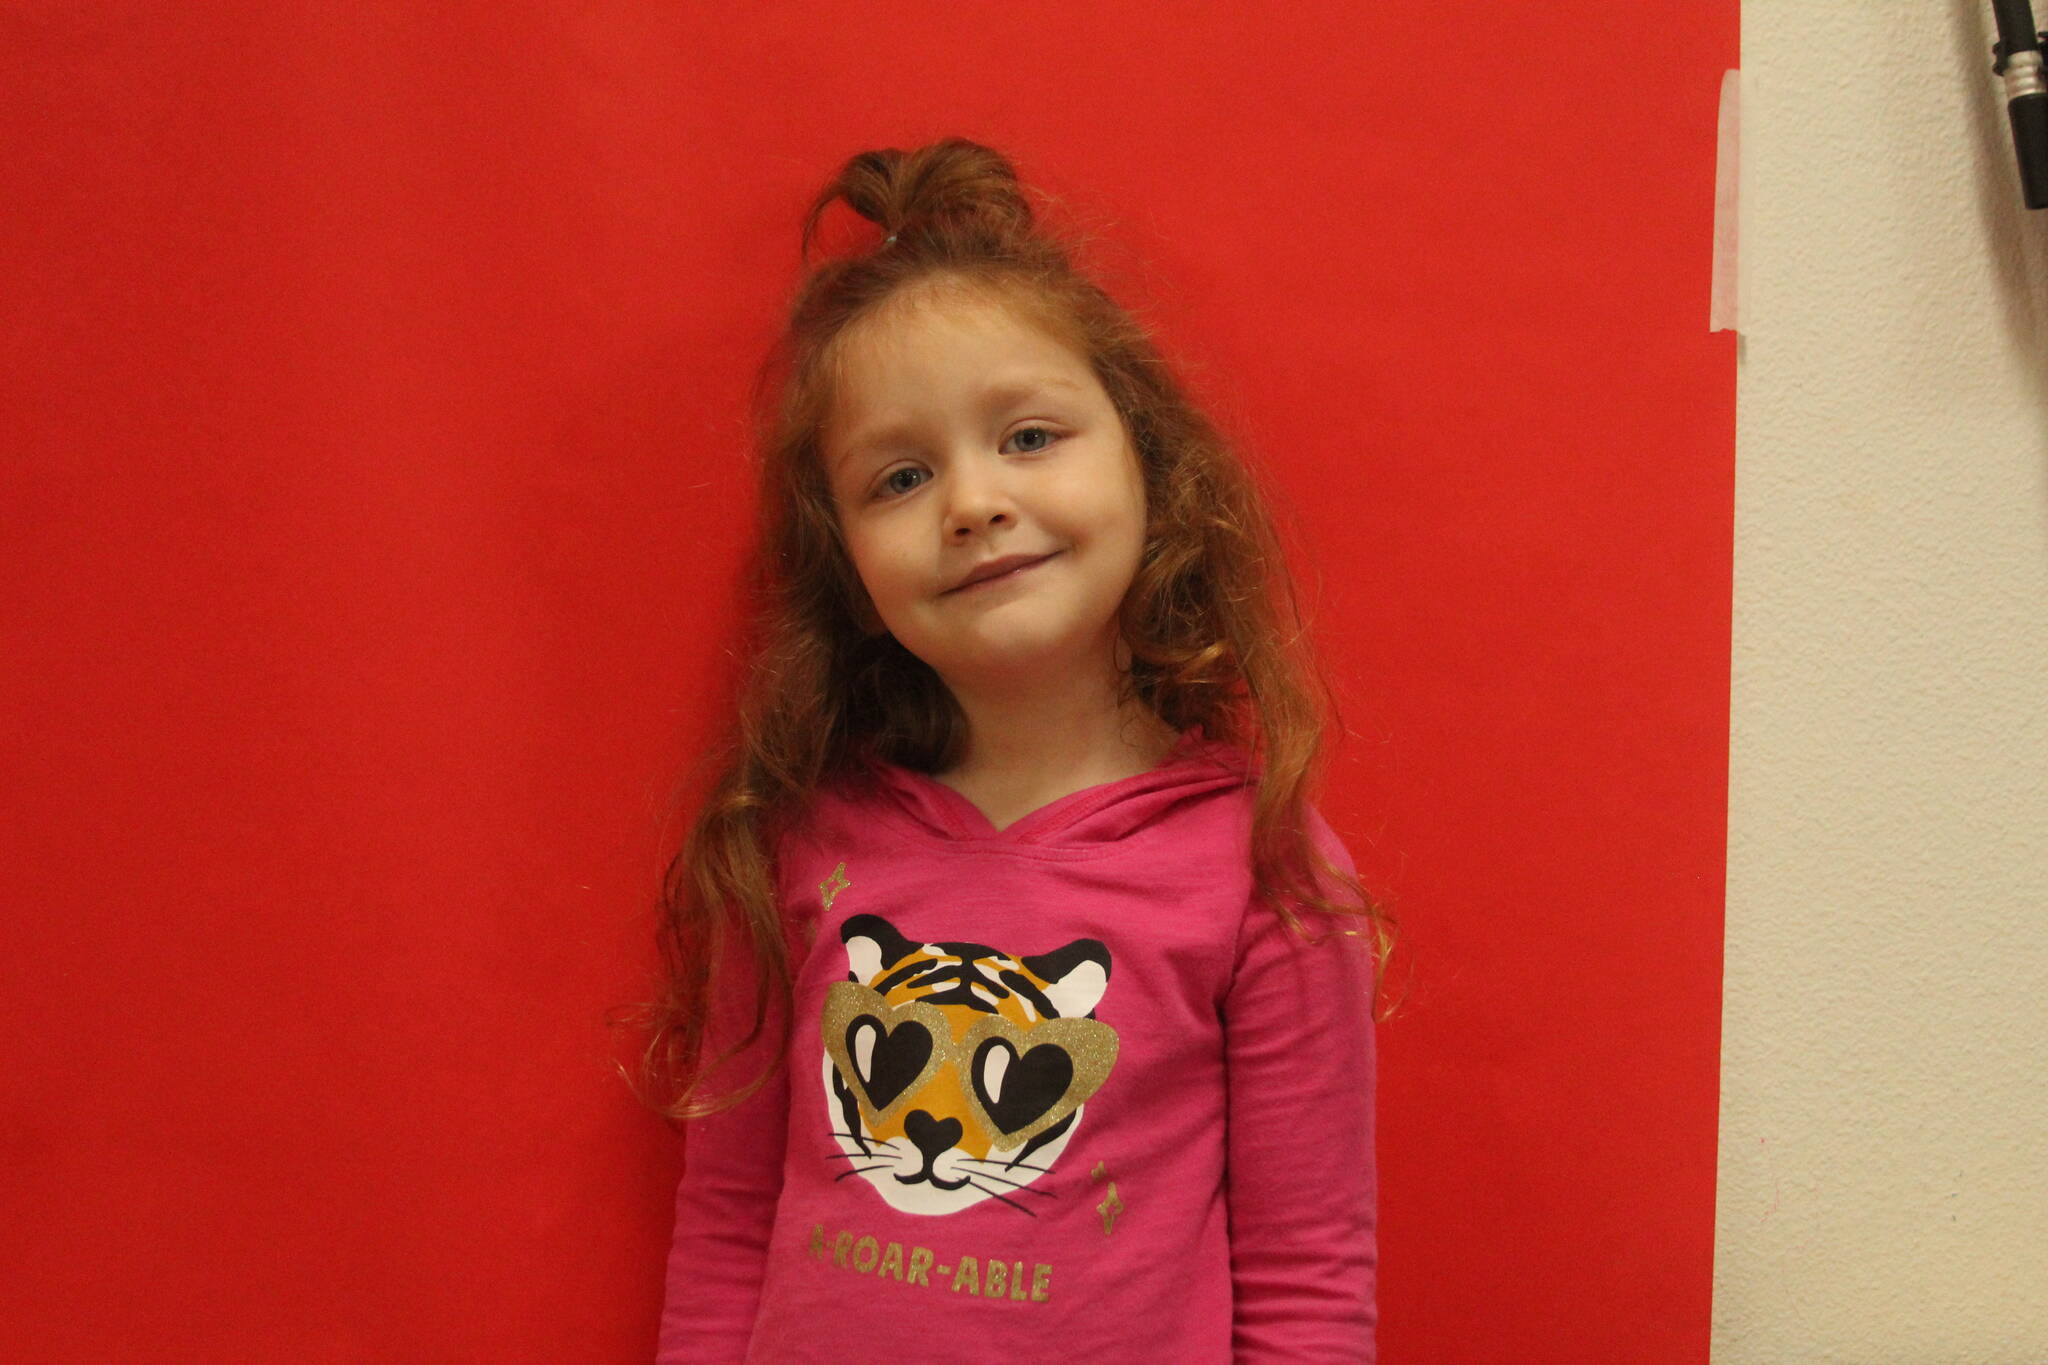 Claire Alward, 5: 
<strong><em>“I want a toy doll and a unicorn</em></strong> stuffie.”